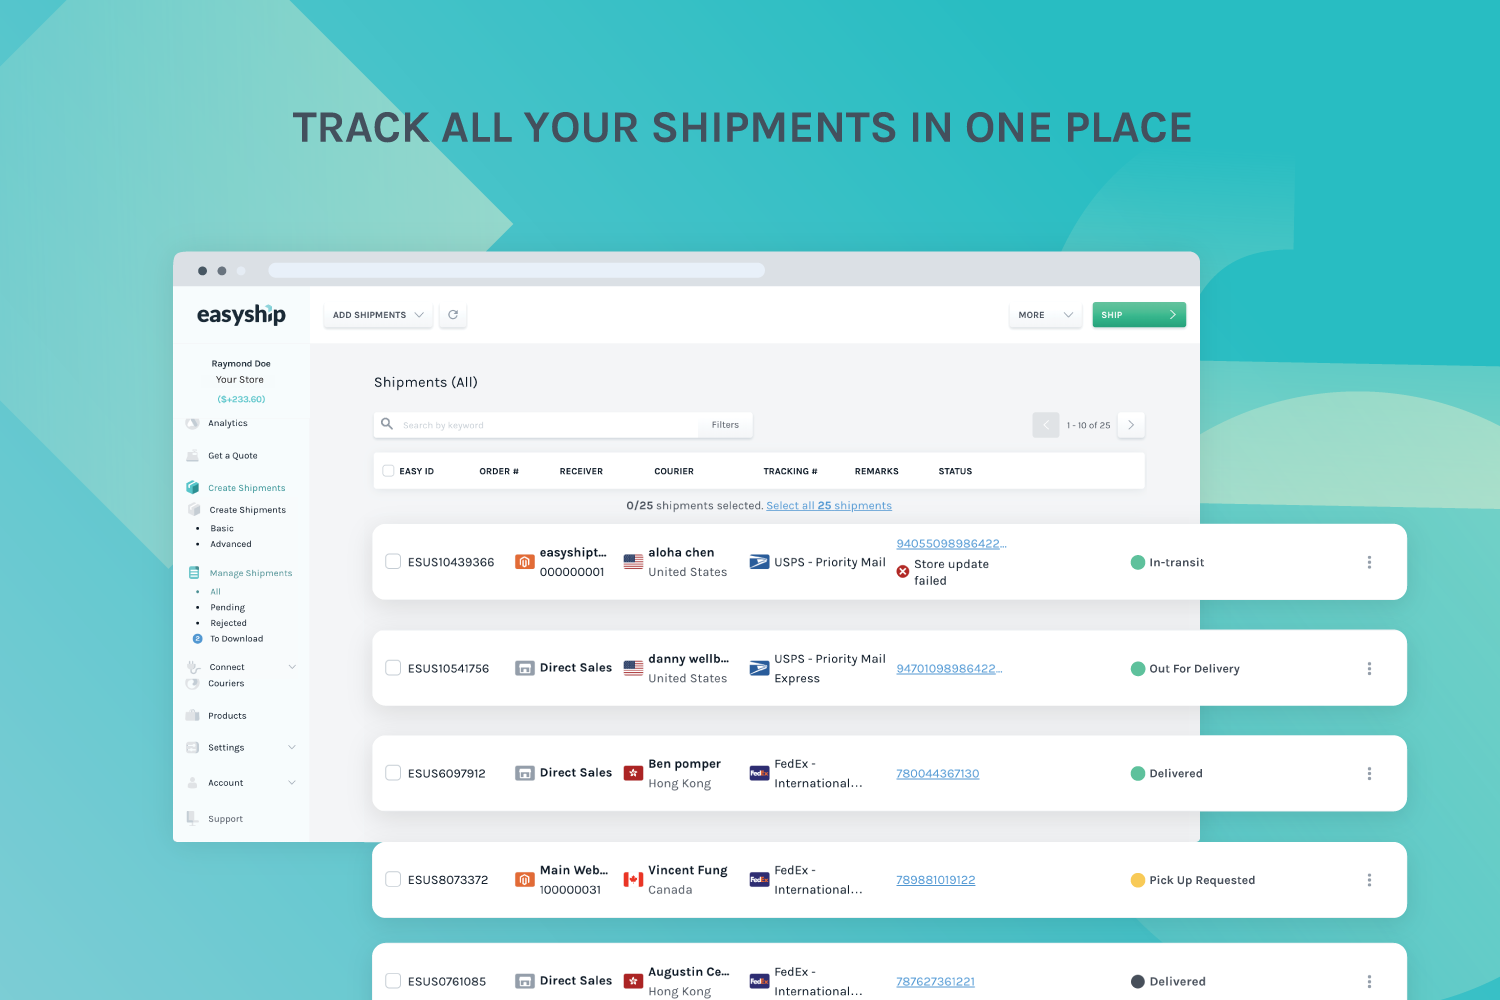 Track all your shipments in one place